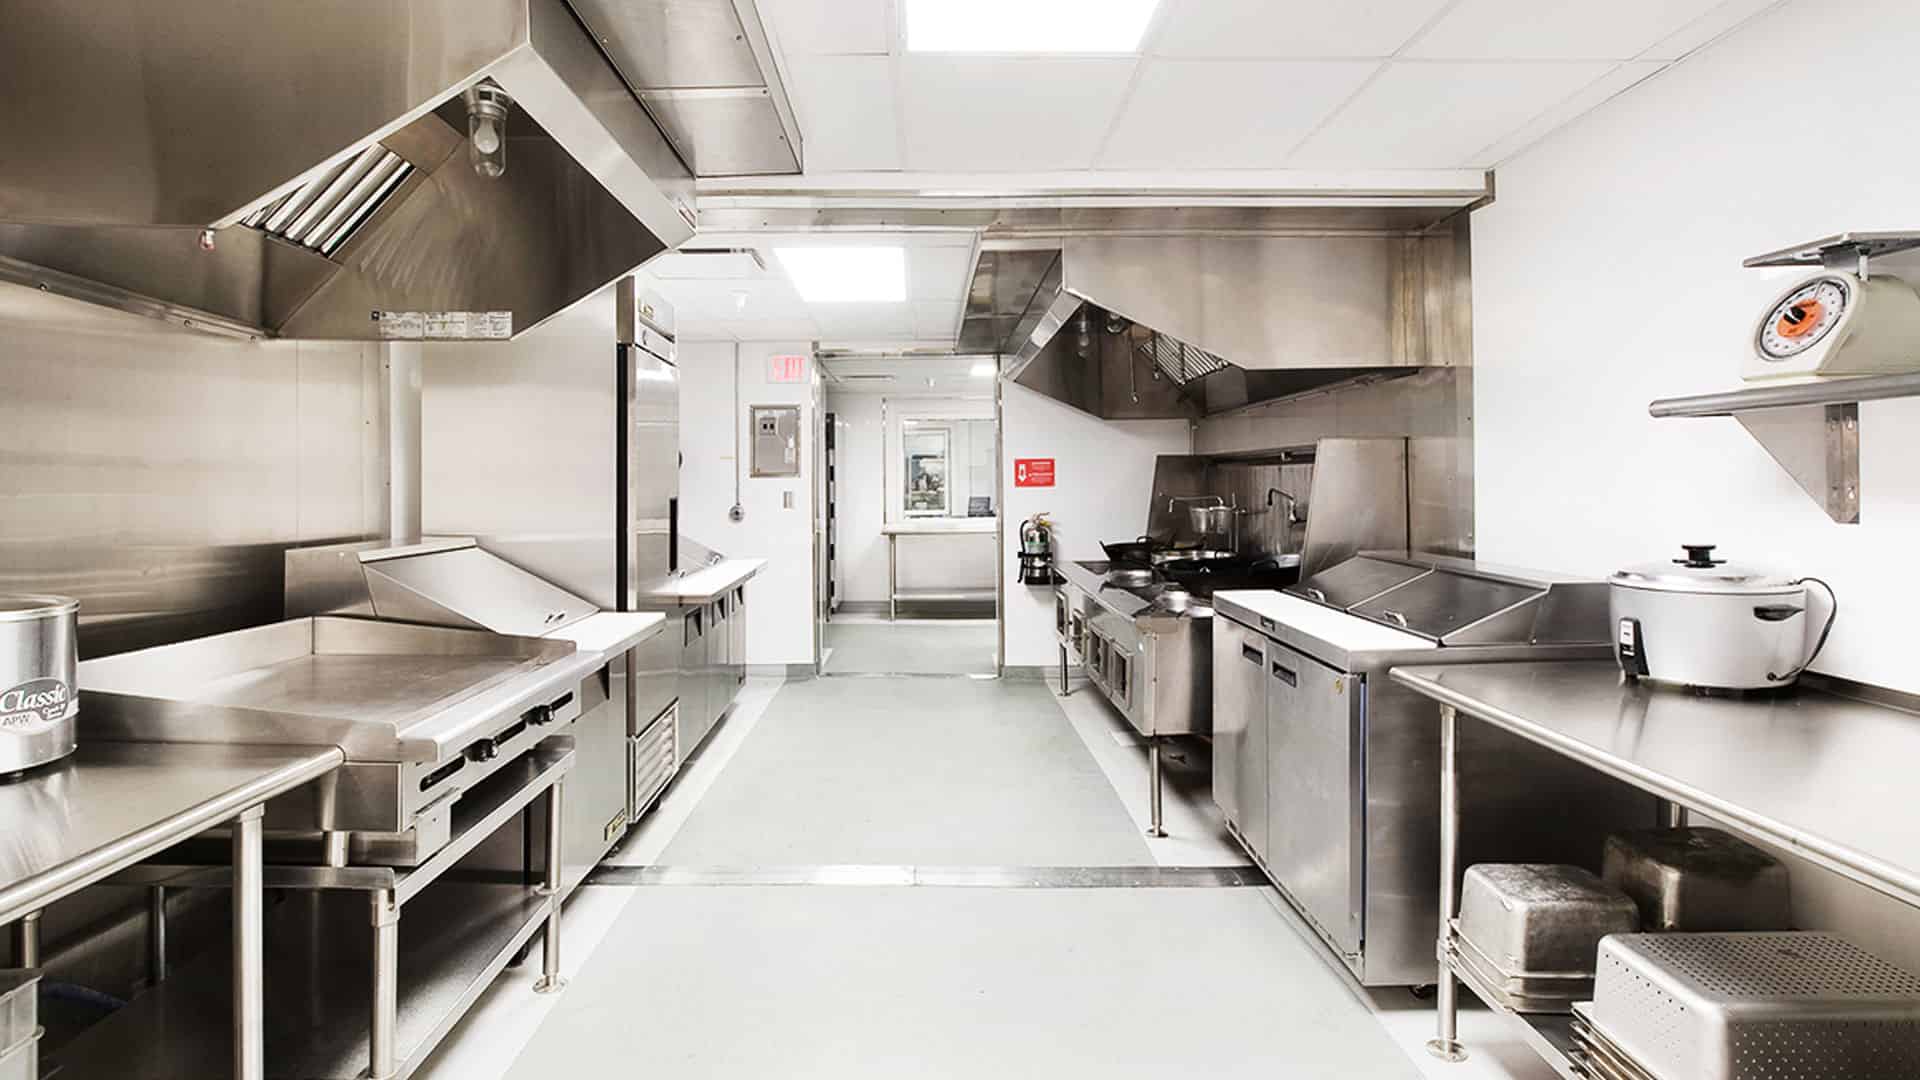 Essential Equipment and Layout for an Efficient Commercial Kitchen